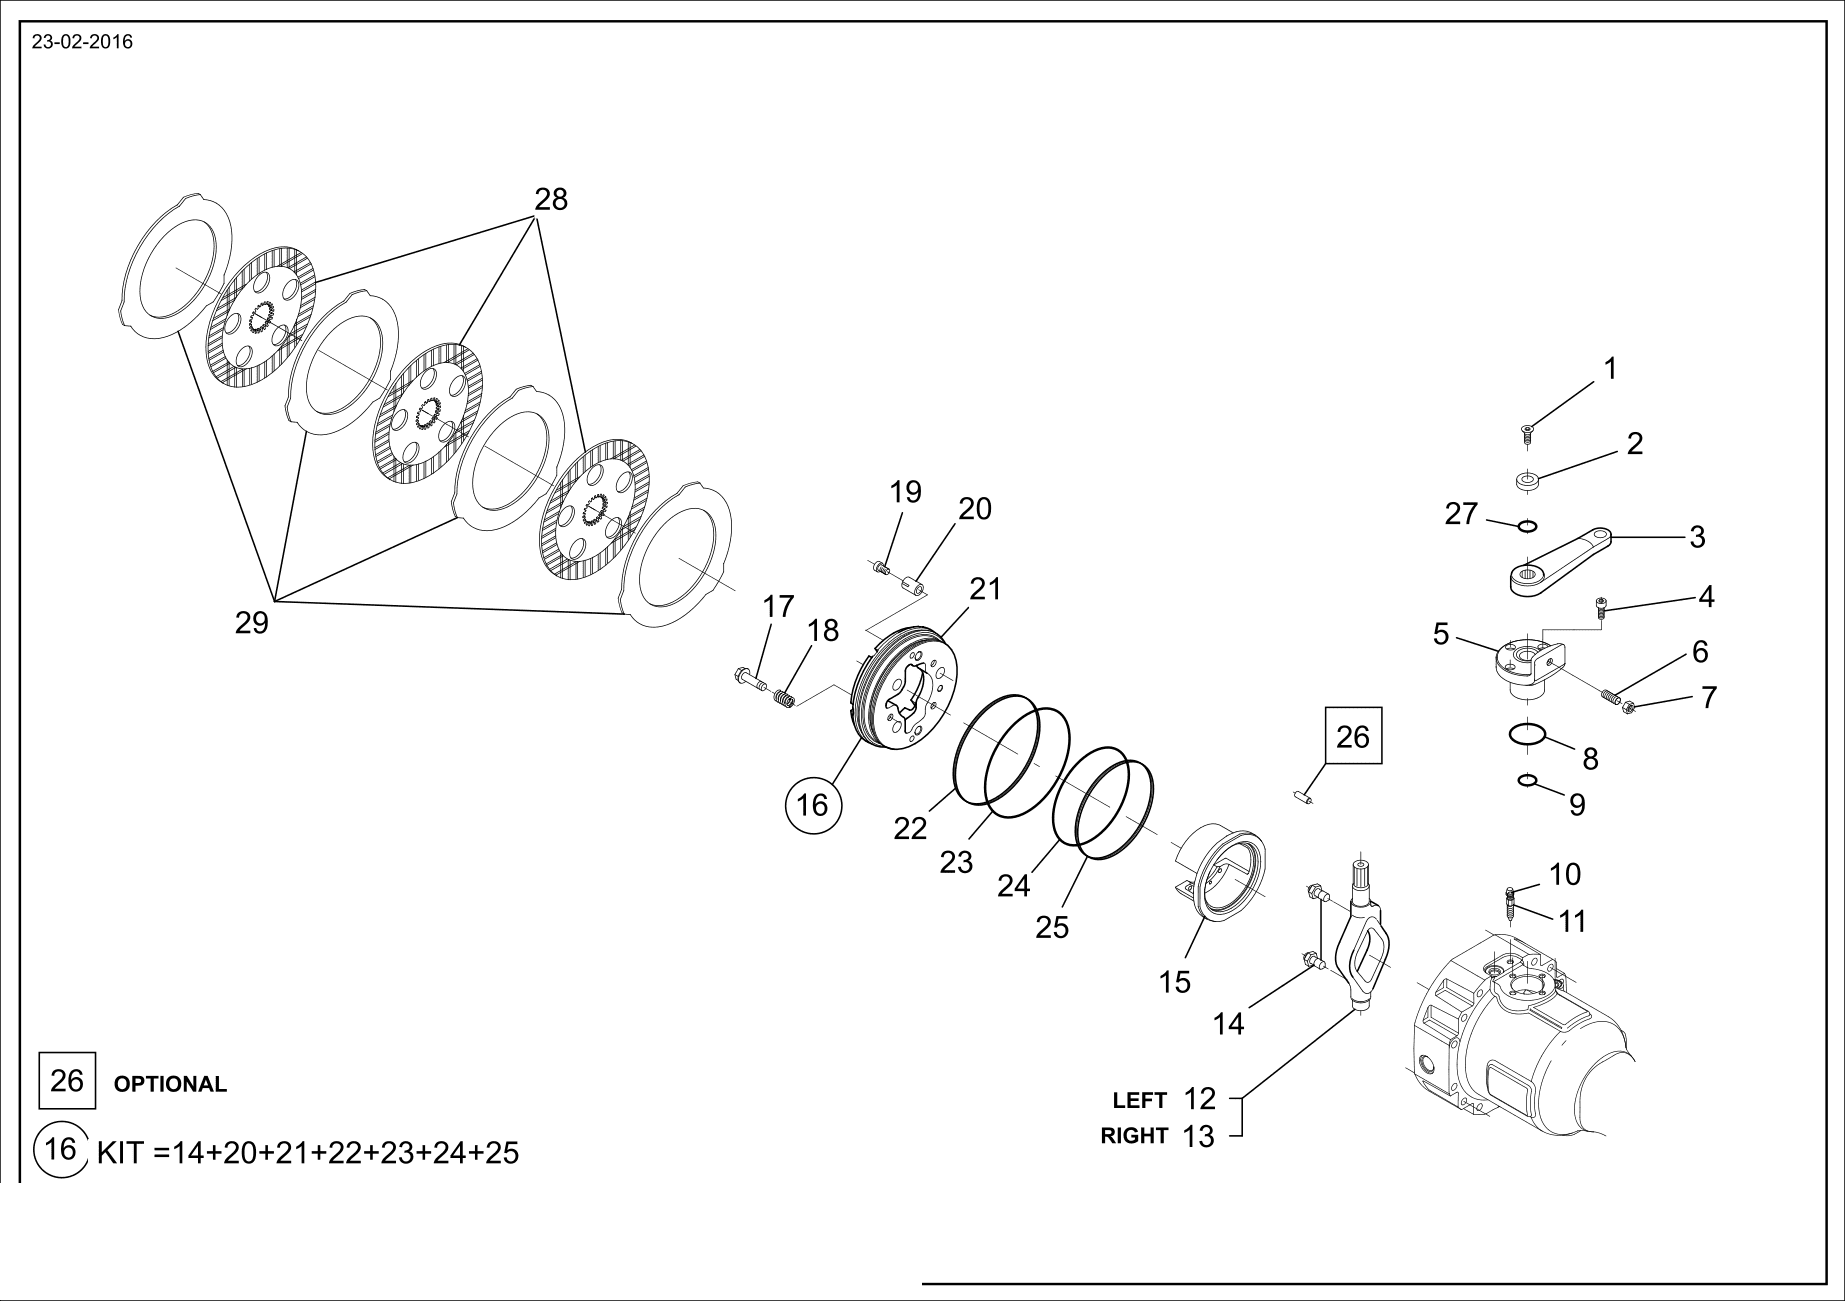 drawing for WEILER 13967C101 - LEVER (figure 1)